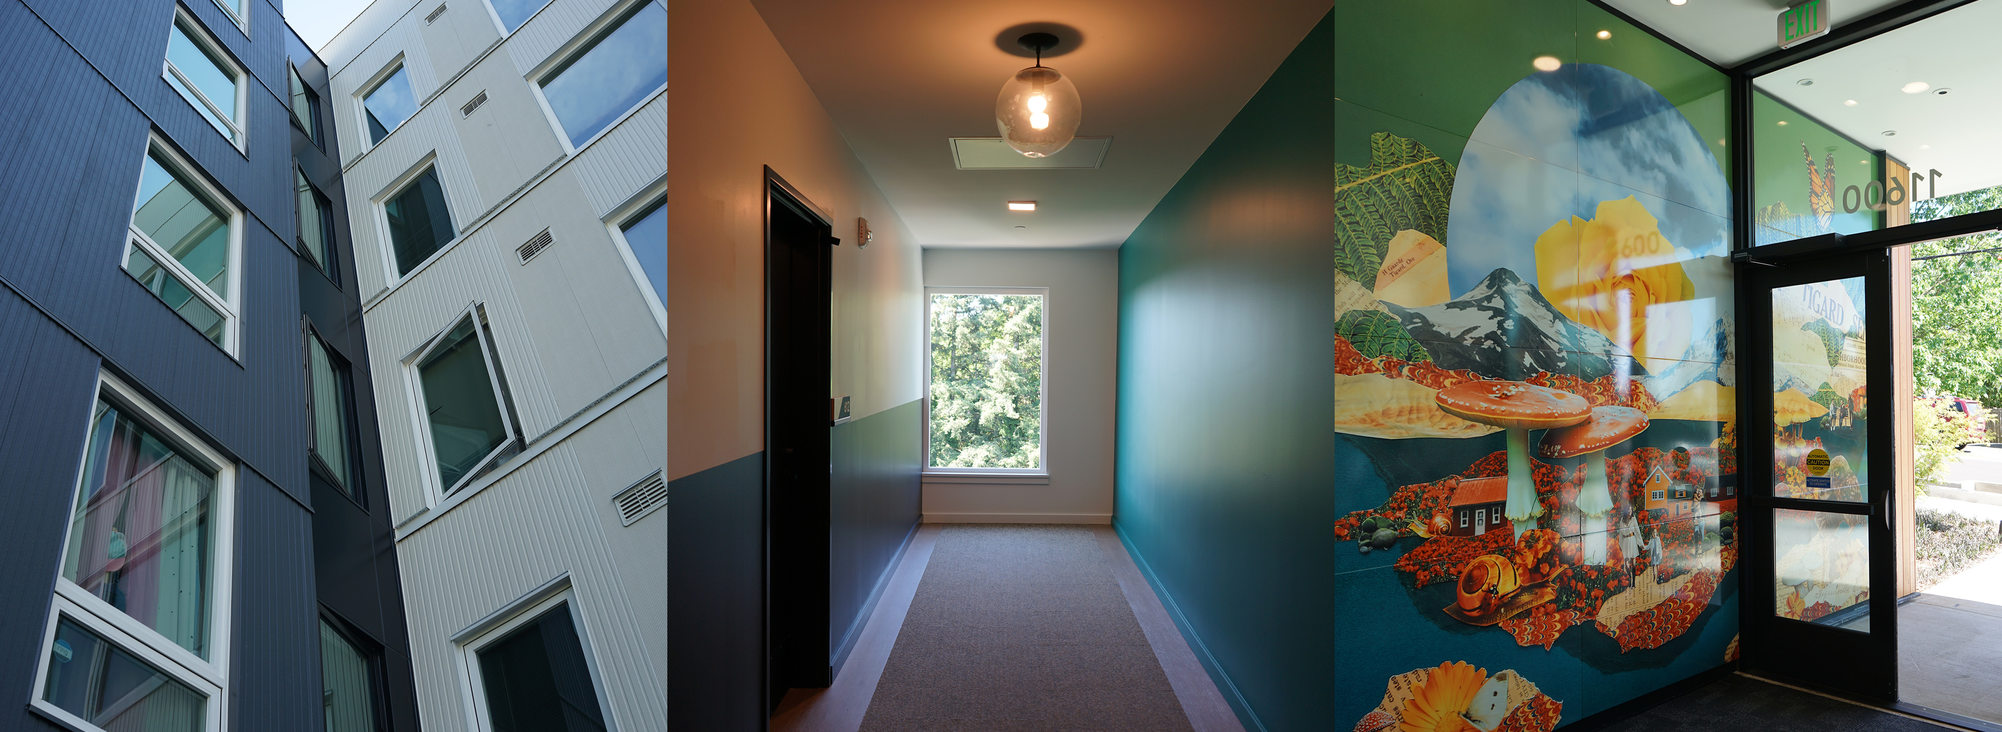 Three images of an apartment building: exterior corner with one grey and one white side, interior hallway with window with tree view, entrance with glass door and window and mushroom mural